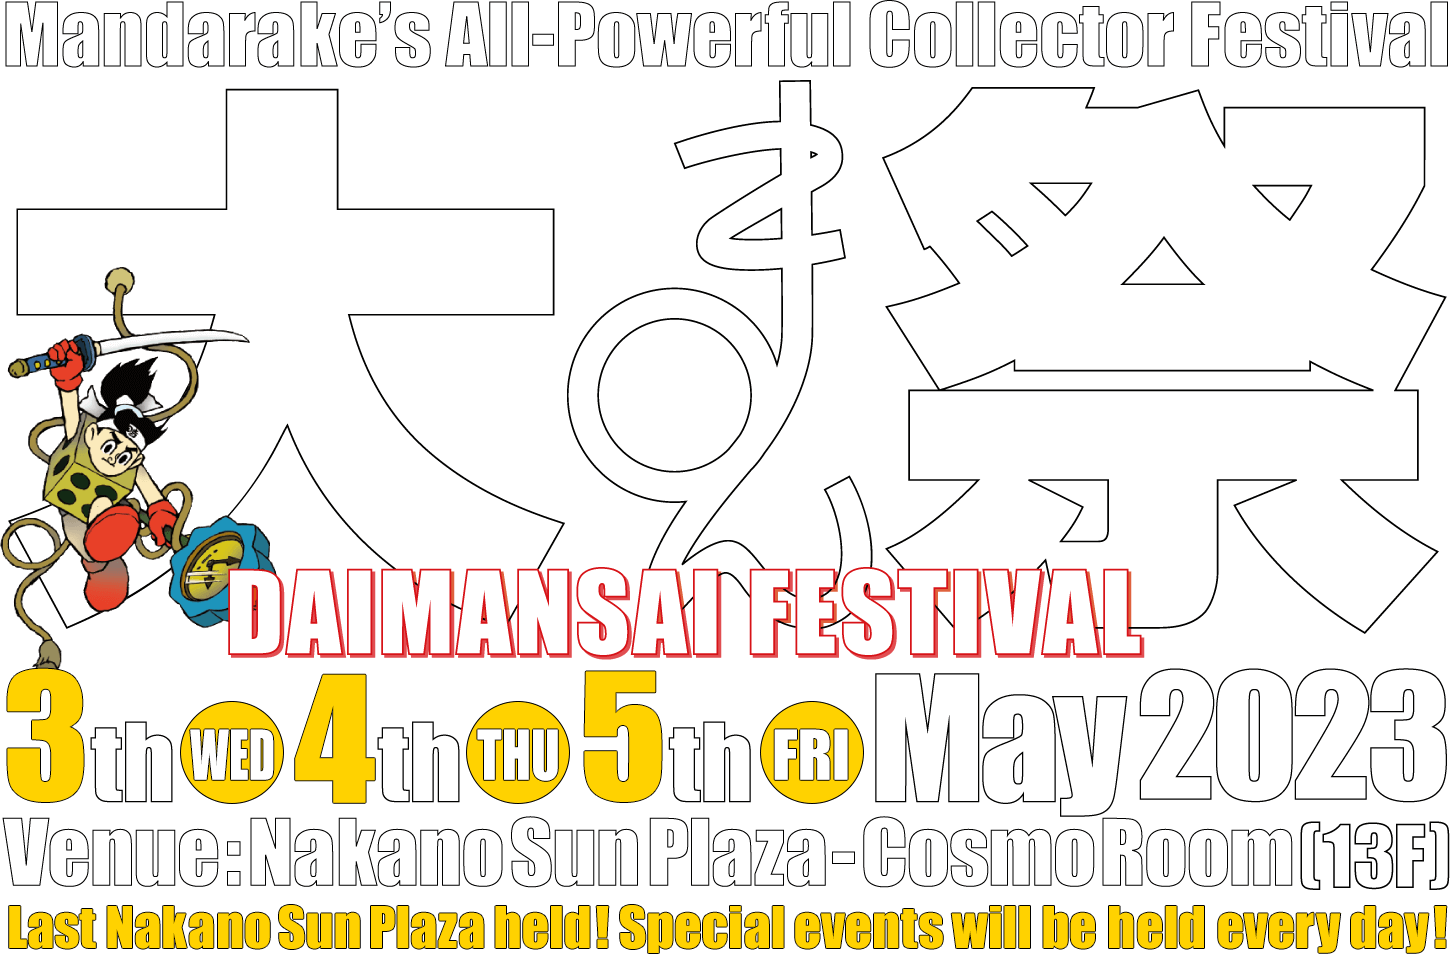 Mandarake's All-Powerful Collector Festival - Daimansai Festival - 3th (WED) 4th (THU) 5th (FRI) May 2023 - Venue: Nakano Sun Plaza - Cosmo Room (13F) - Last Nakano Sun Plaza held! Special events will be held every day!